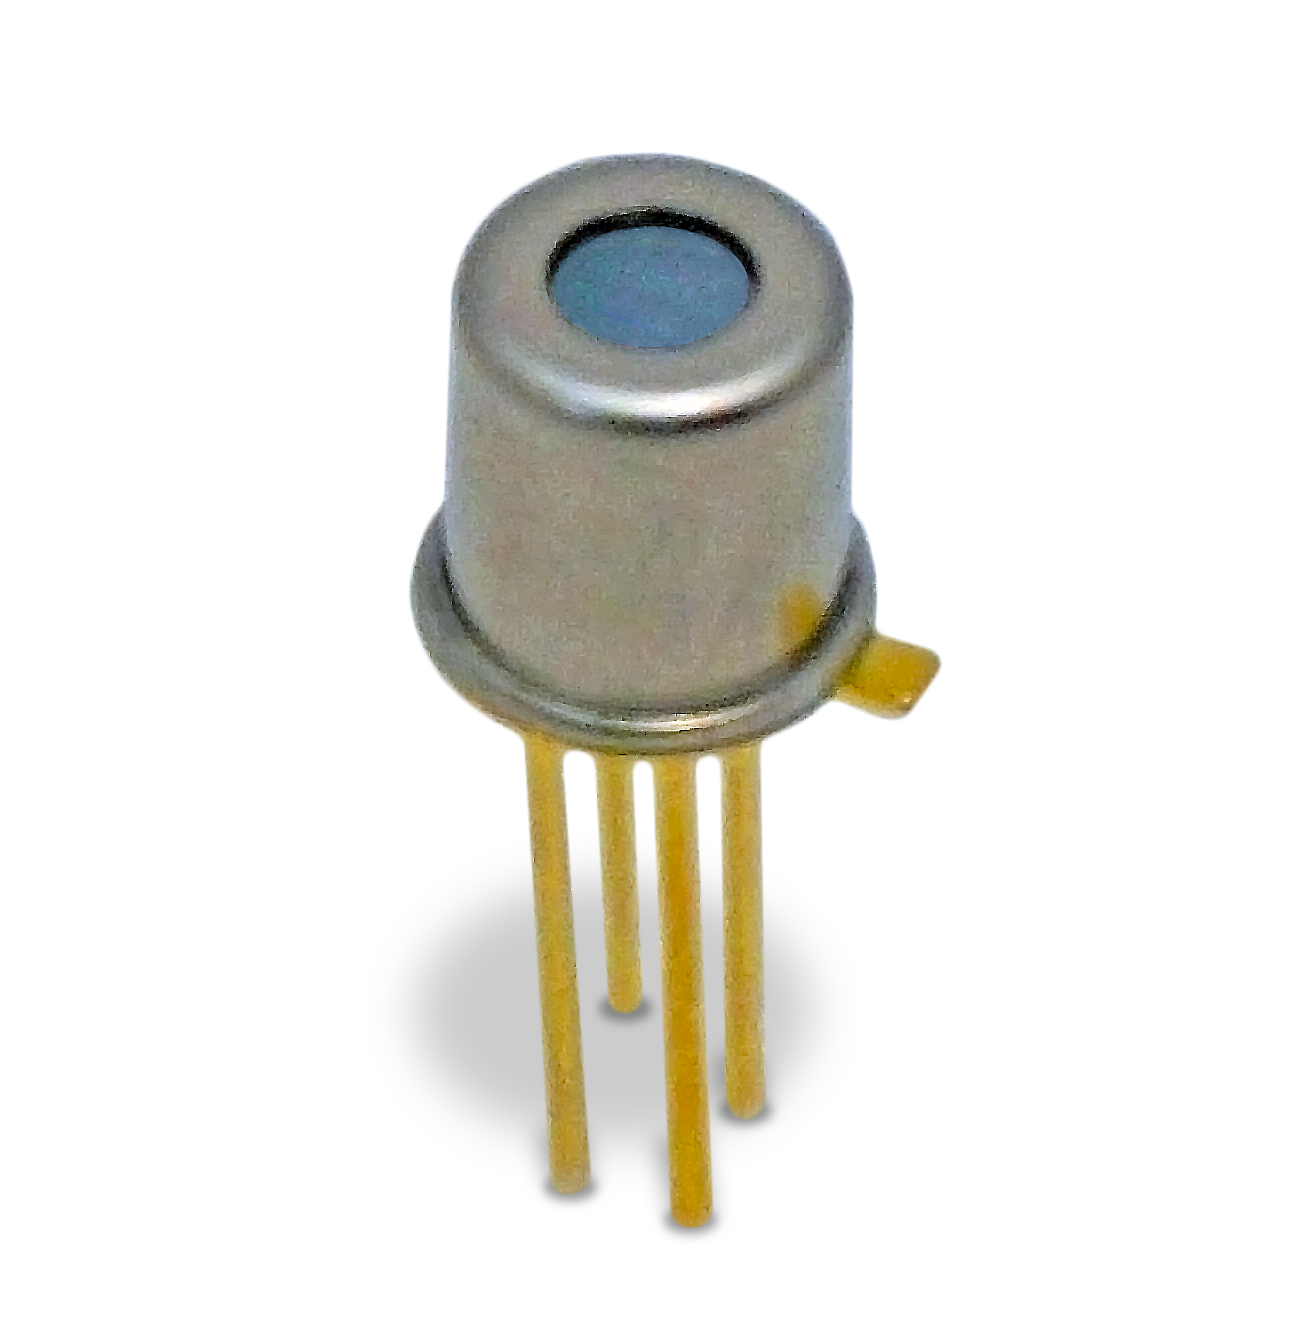 Excelitas' NEW TPiD 1T 0122 L3.0 Thermopile Detector features a miniature TO-46 housing and a focusing lens